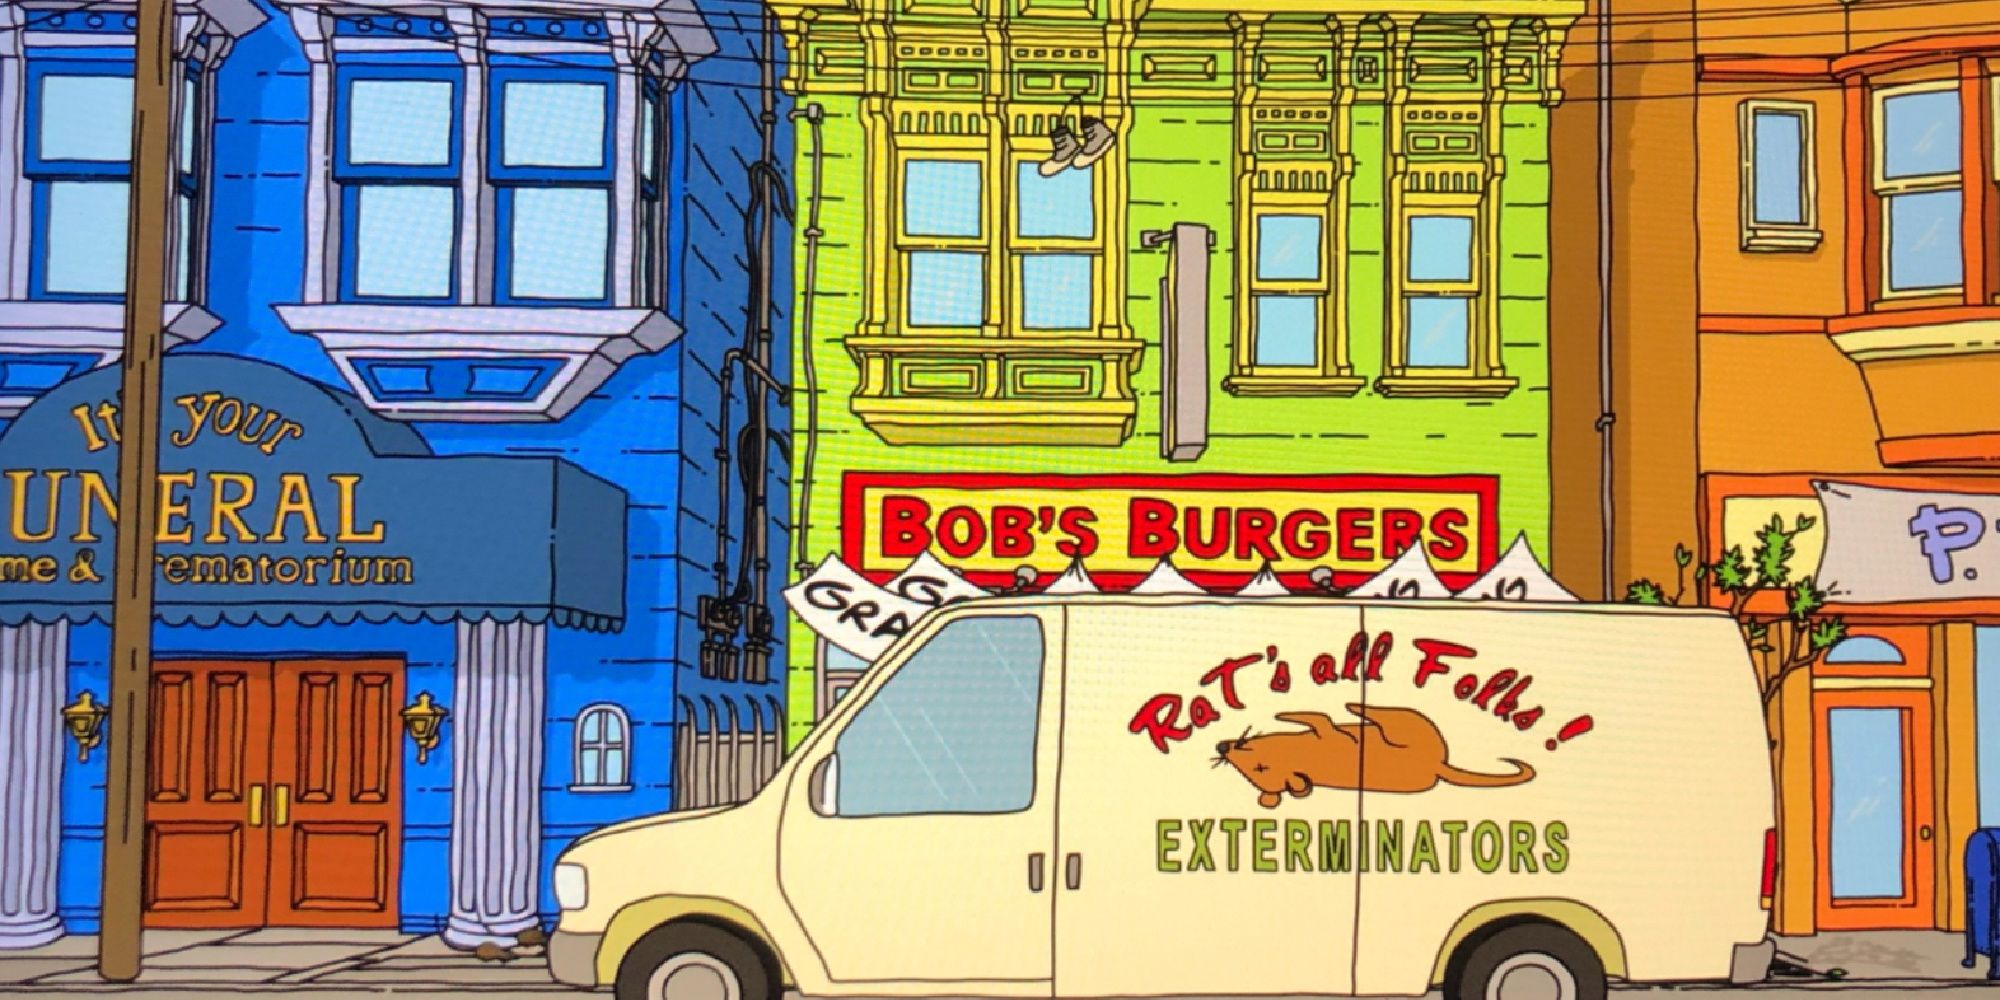 The pest control truck outside Bob's Burgers